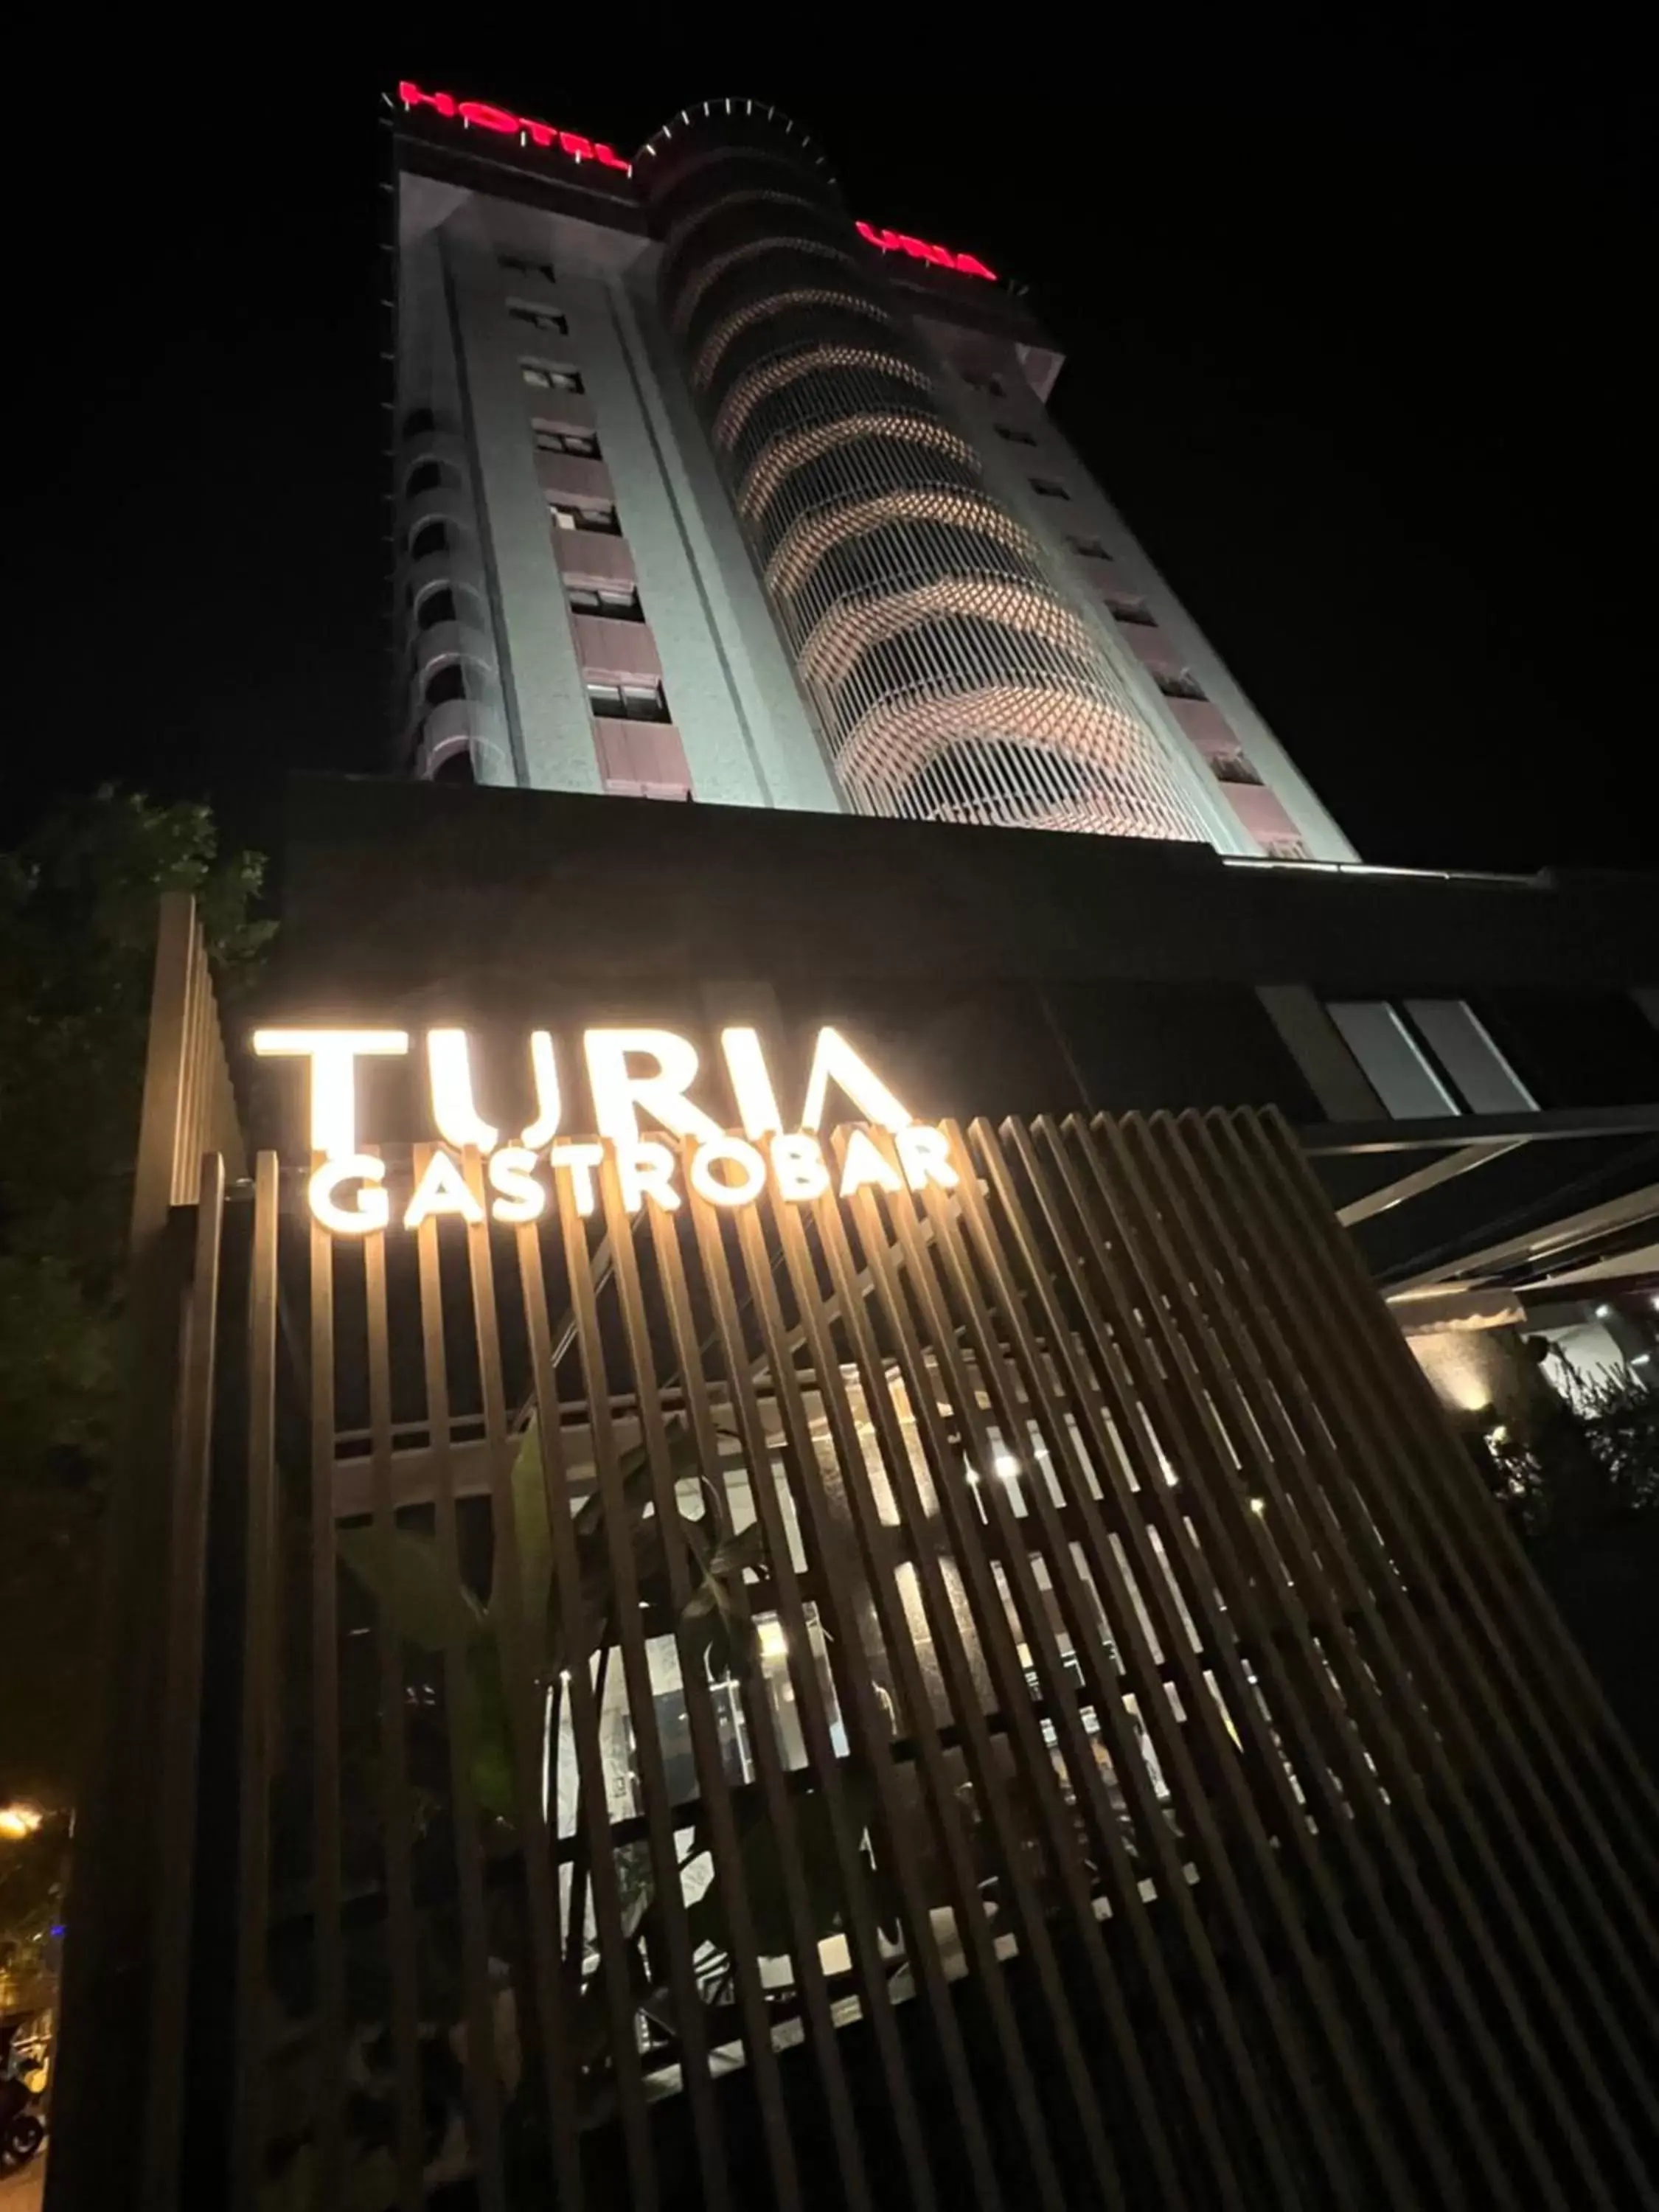 Property Building in Hotel Turia